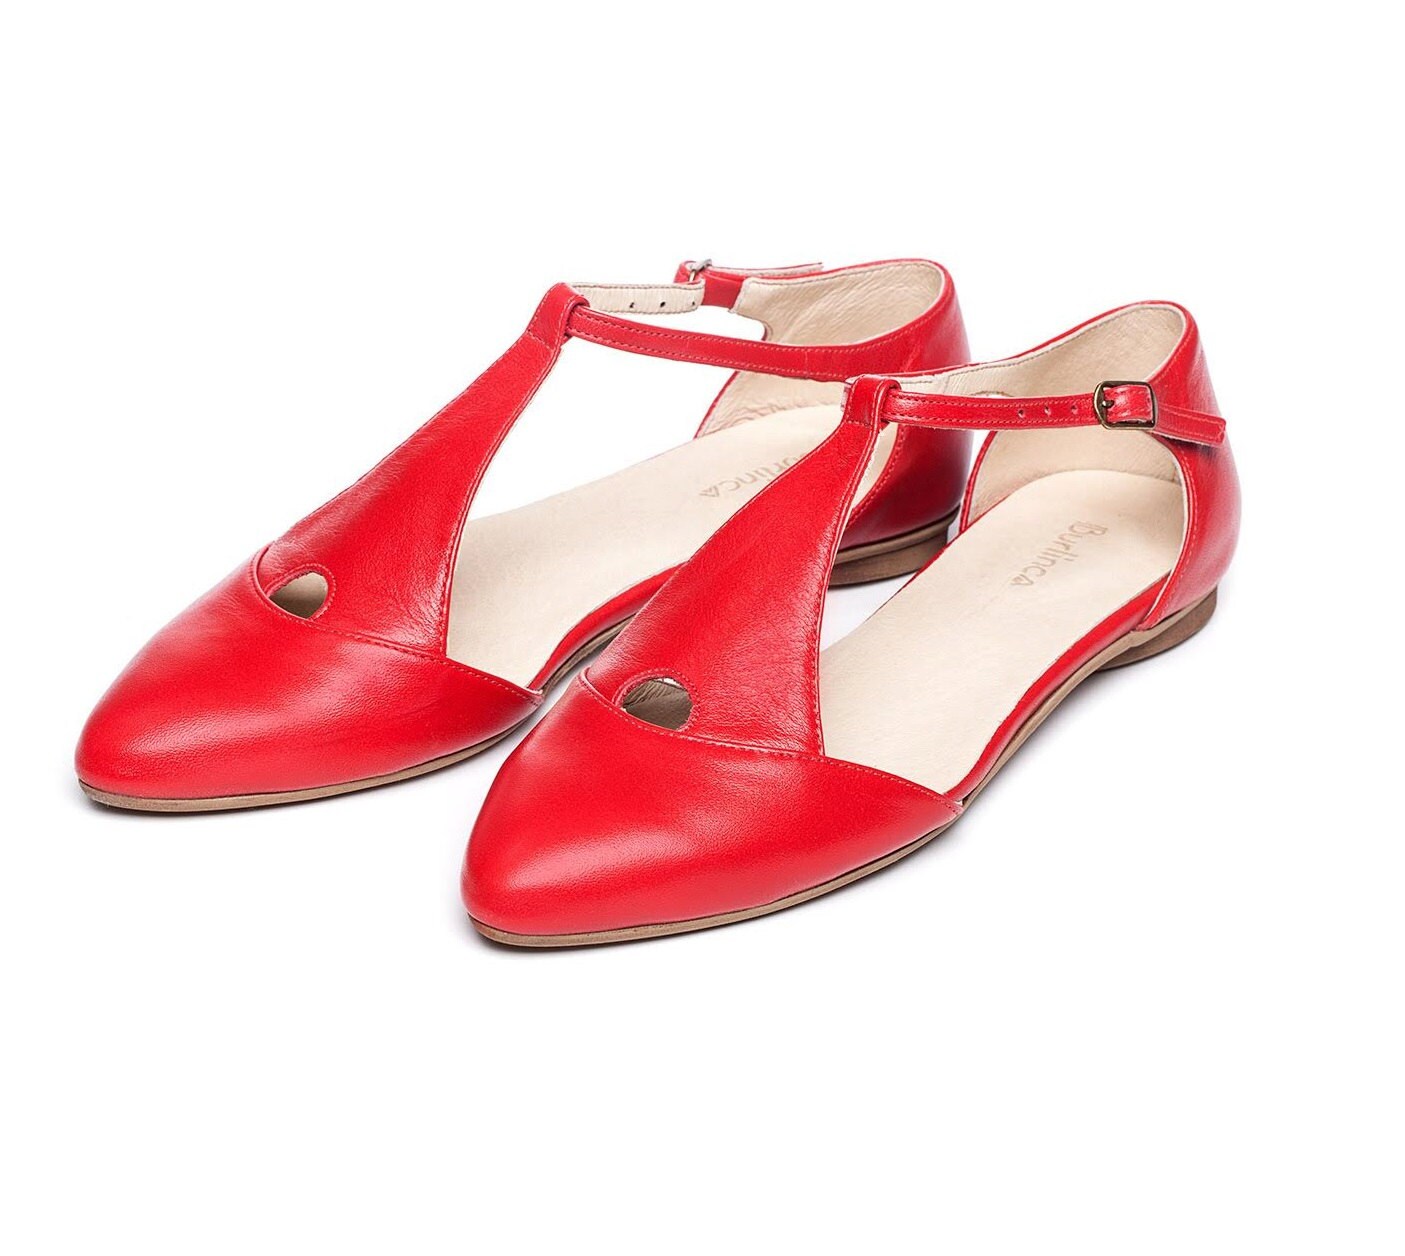 Red shoes red sandals women's shoes flat sandals